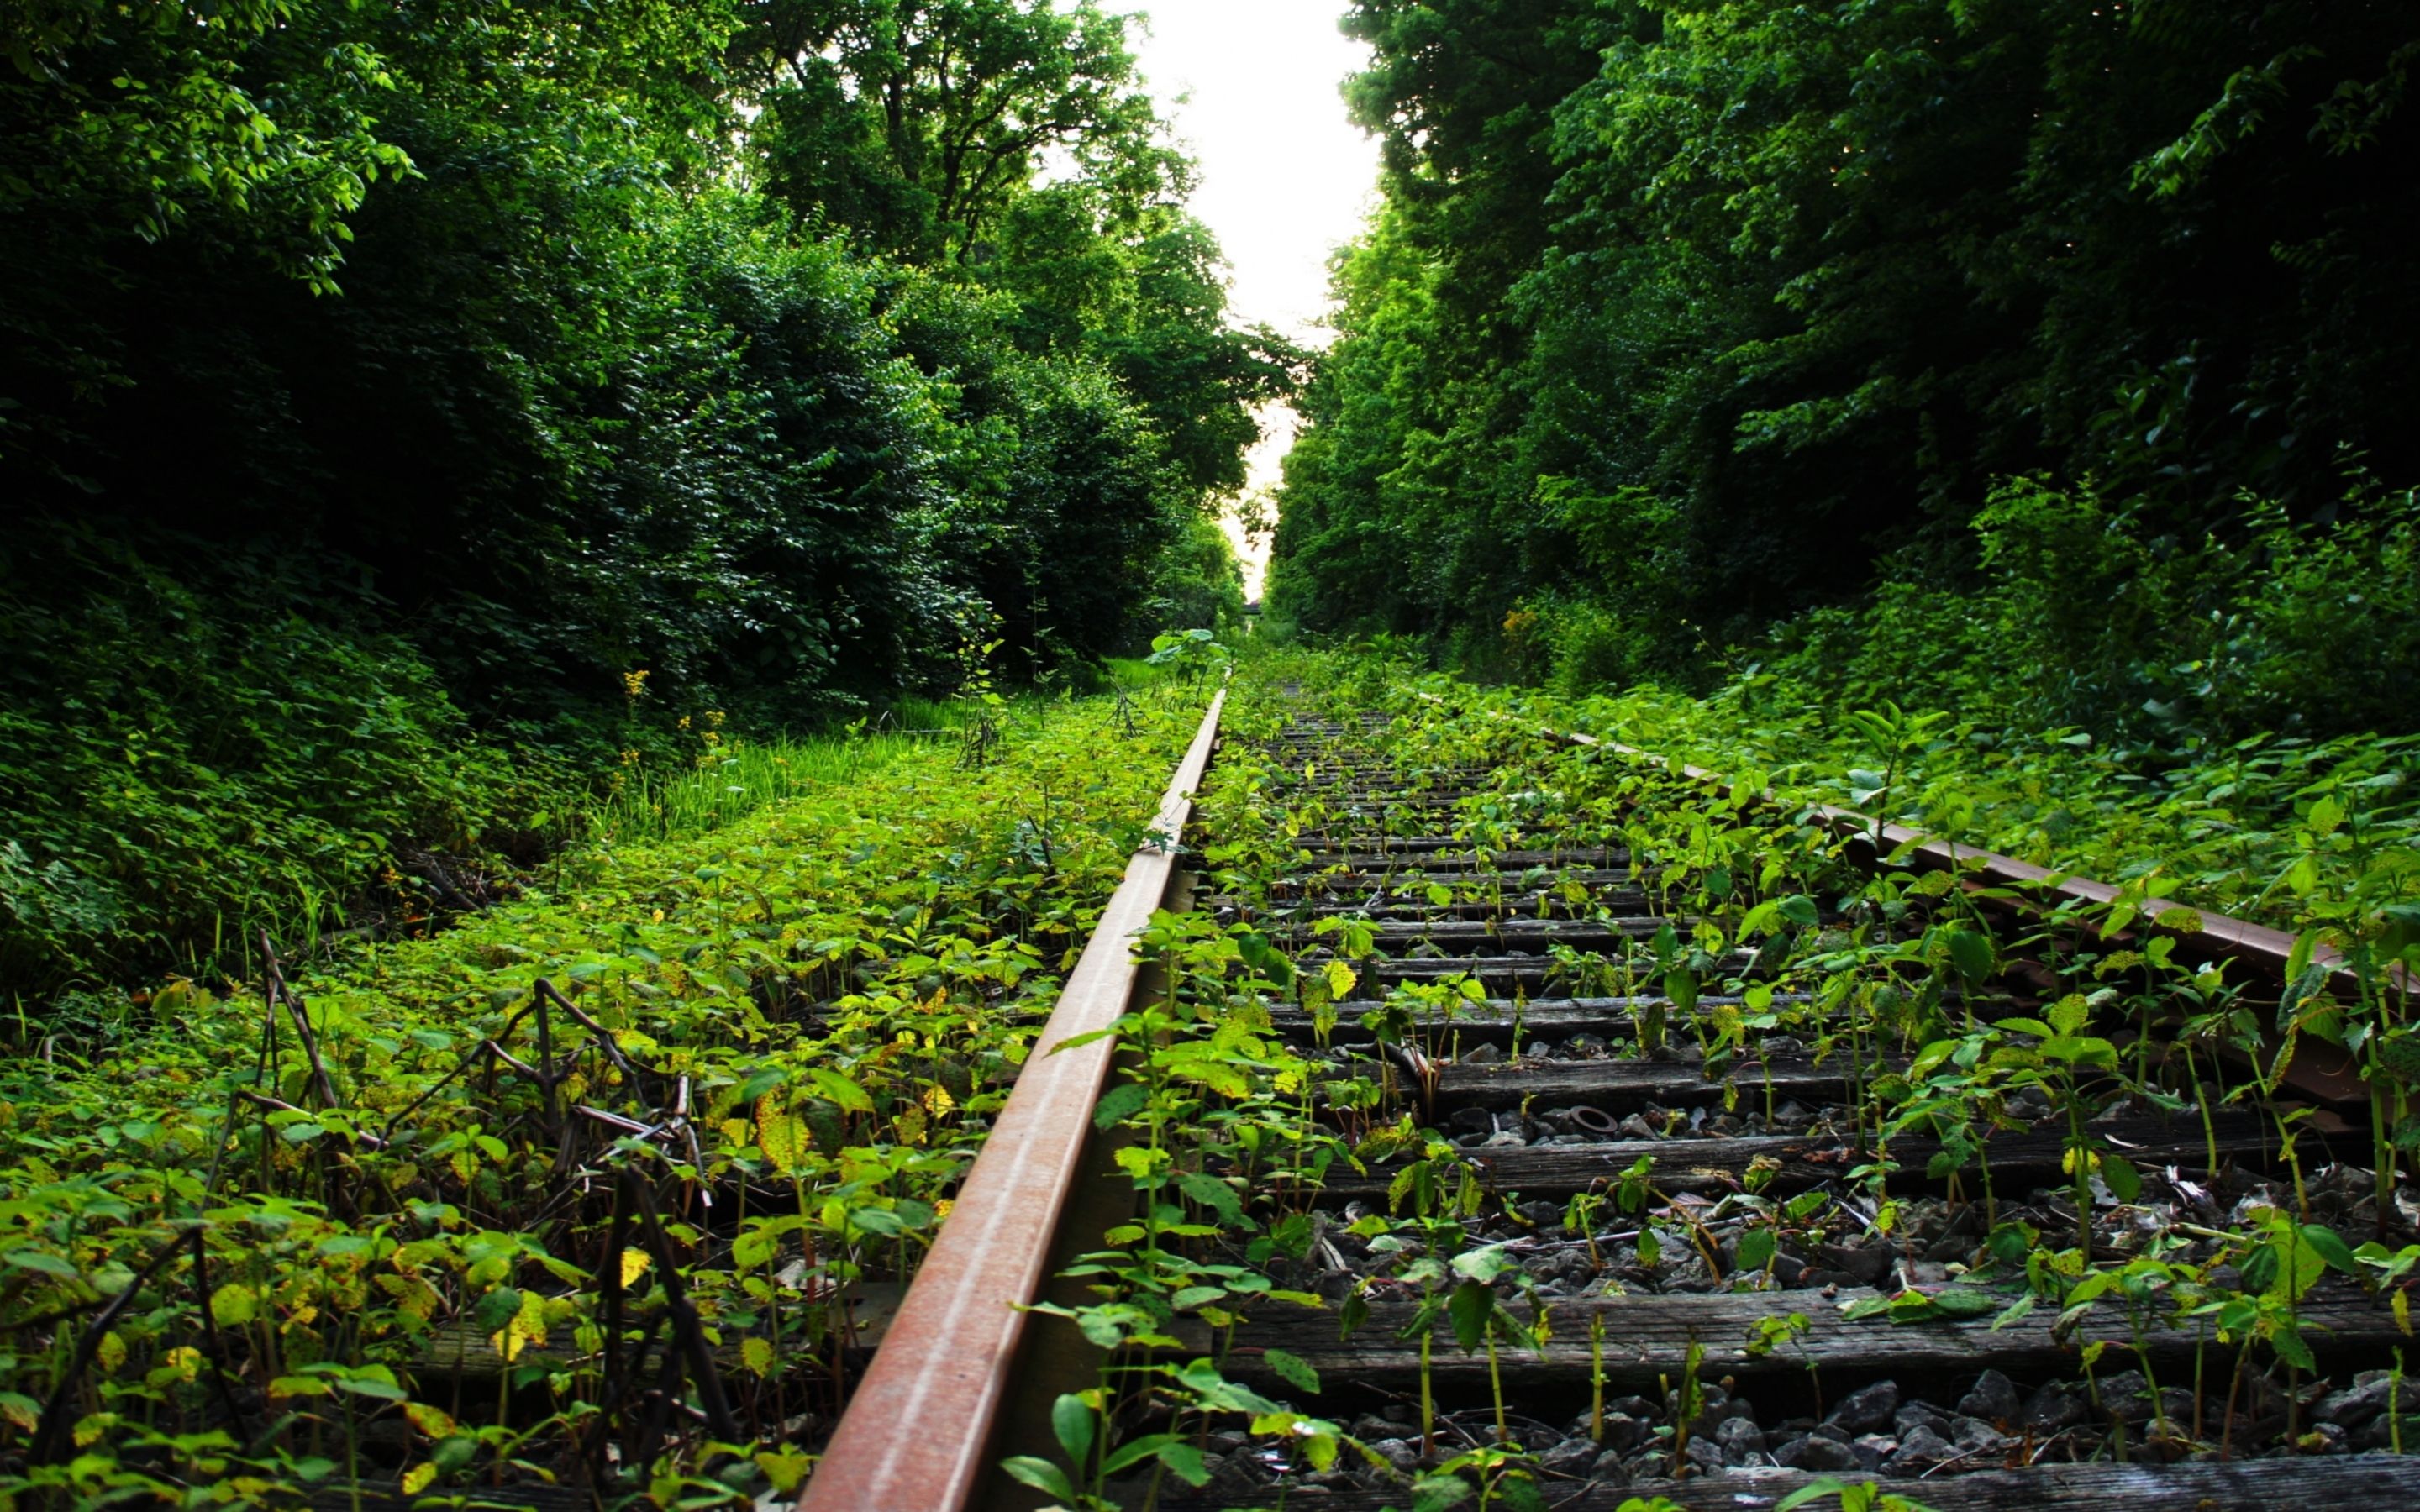 A train track that is surrounded by trees - Forest